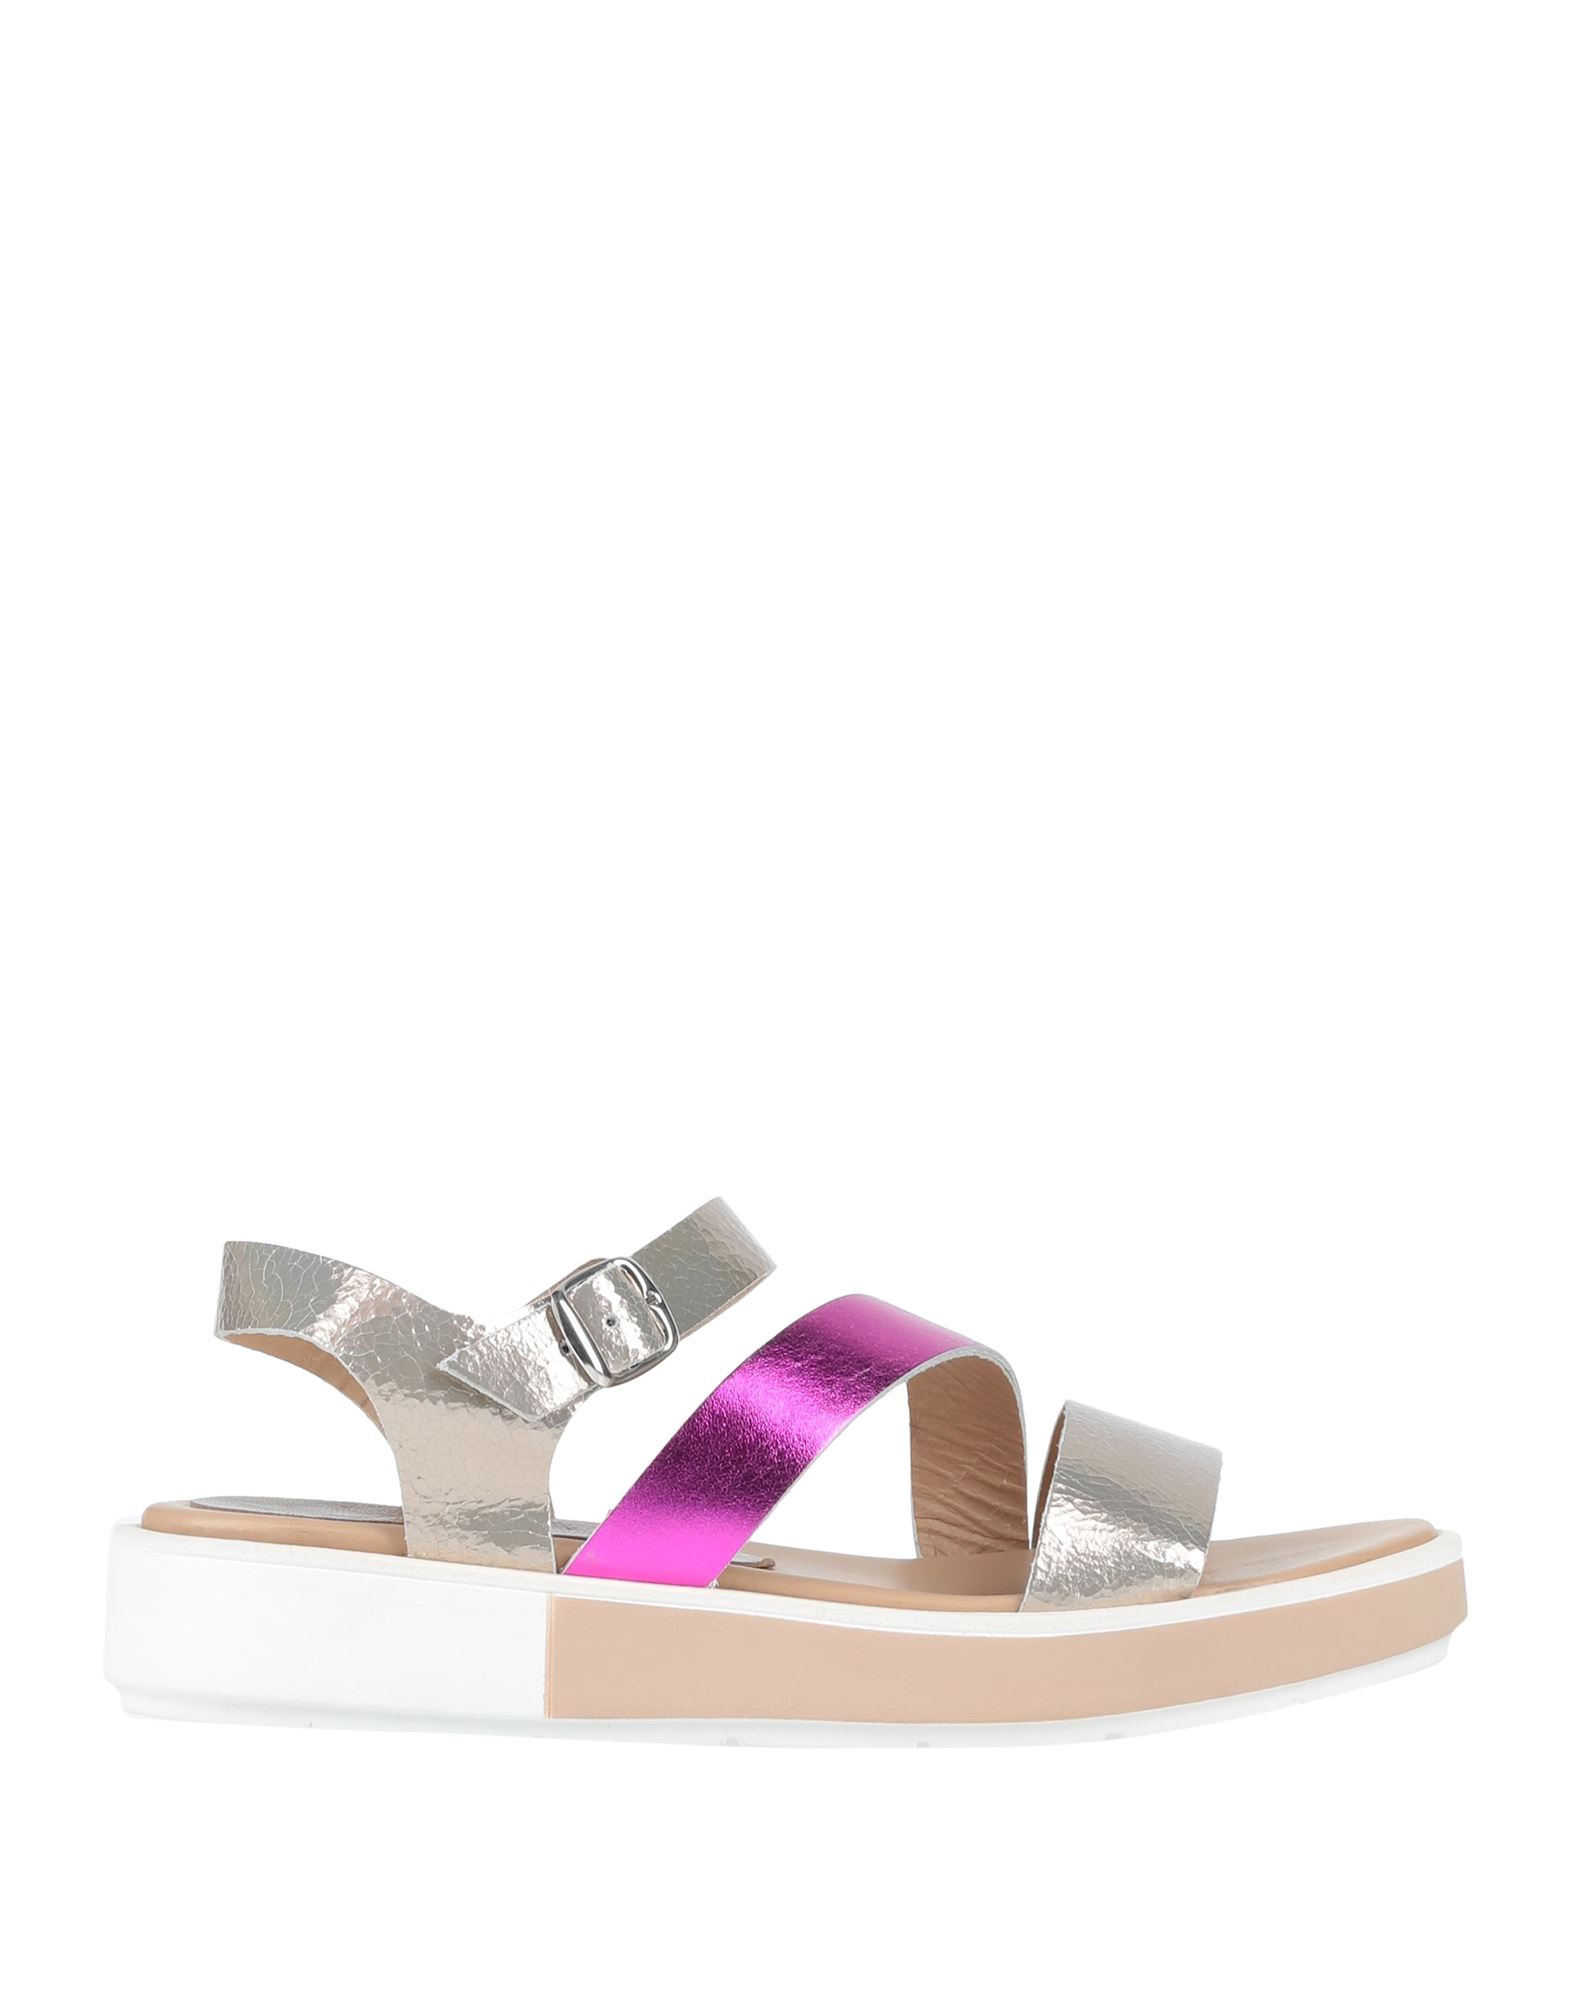 Stele Sandals In Pink